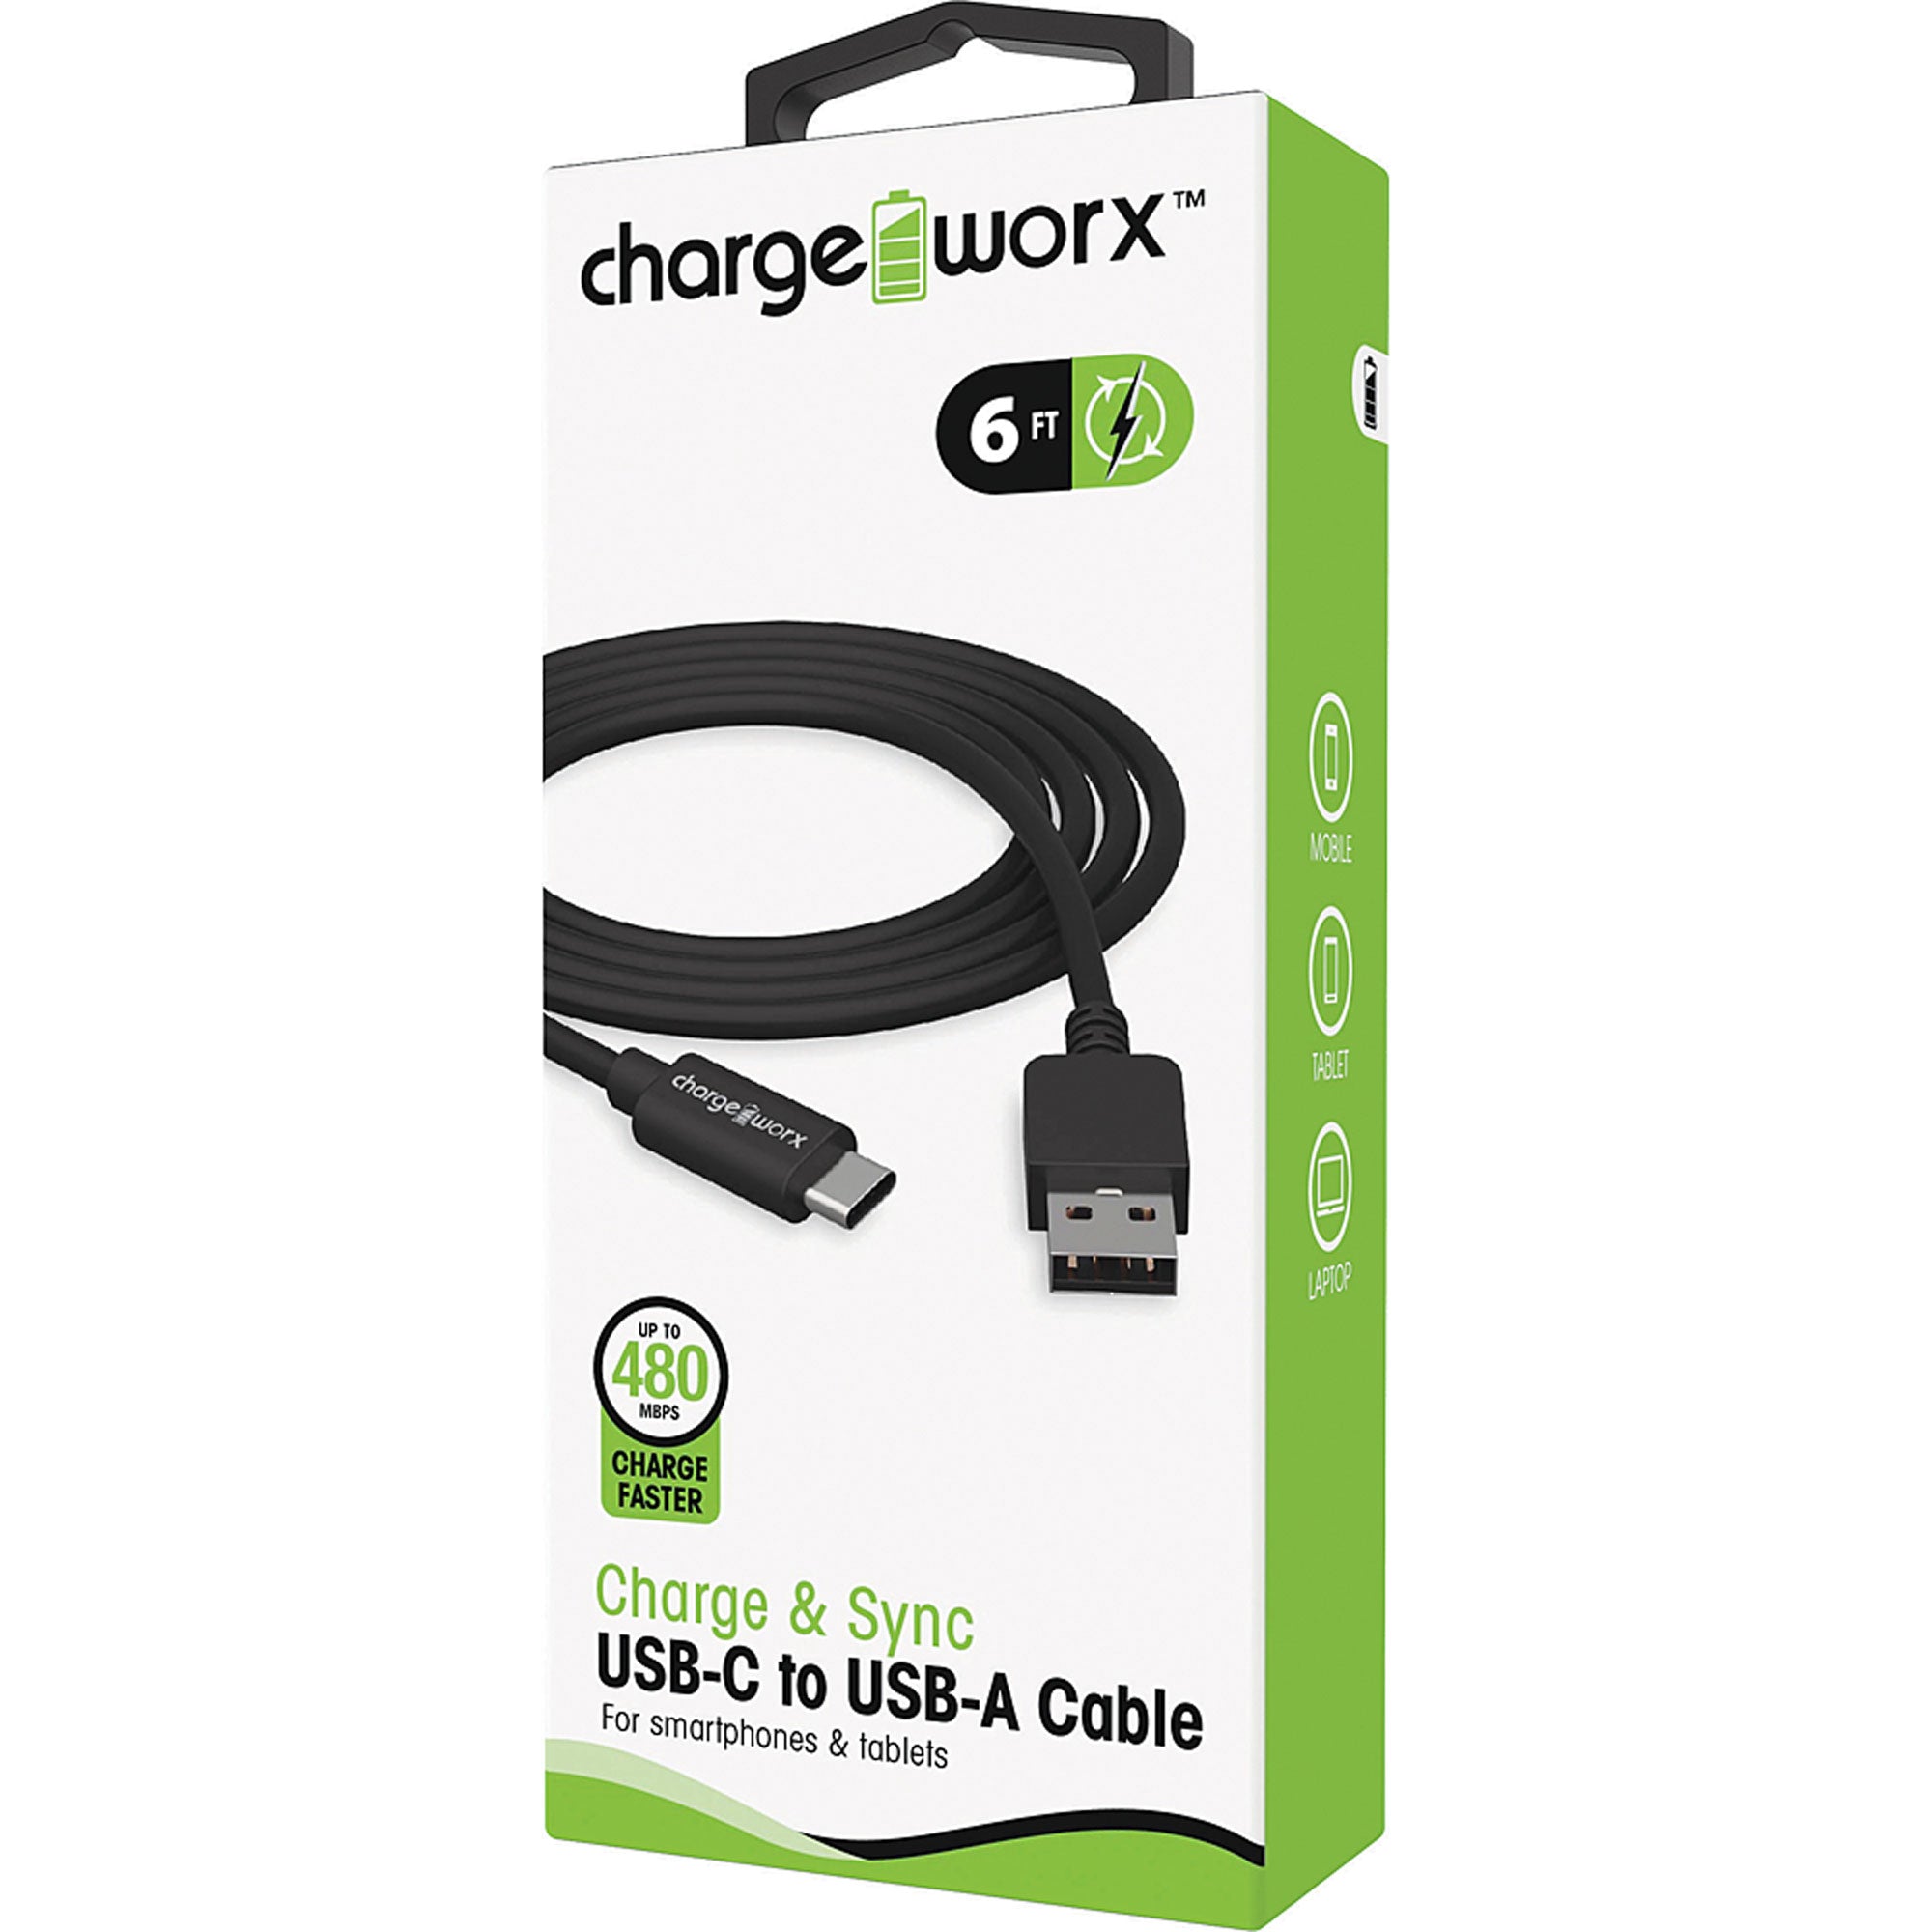 Chargeworx 6ft USB-C to USB-A Sync & Charge Cable